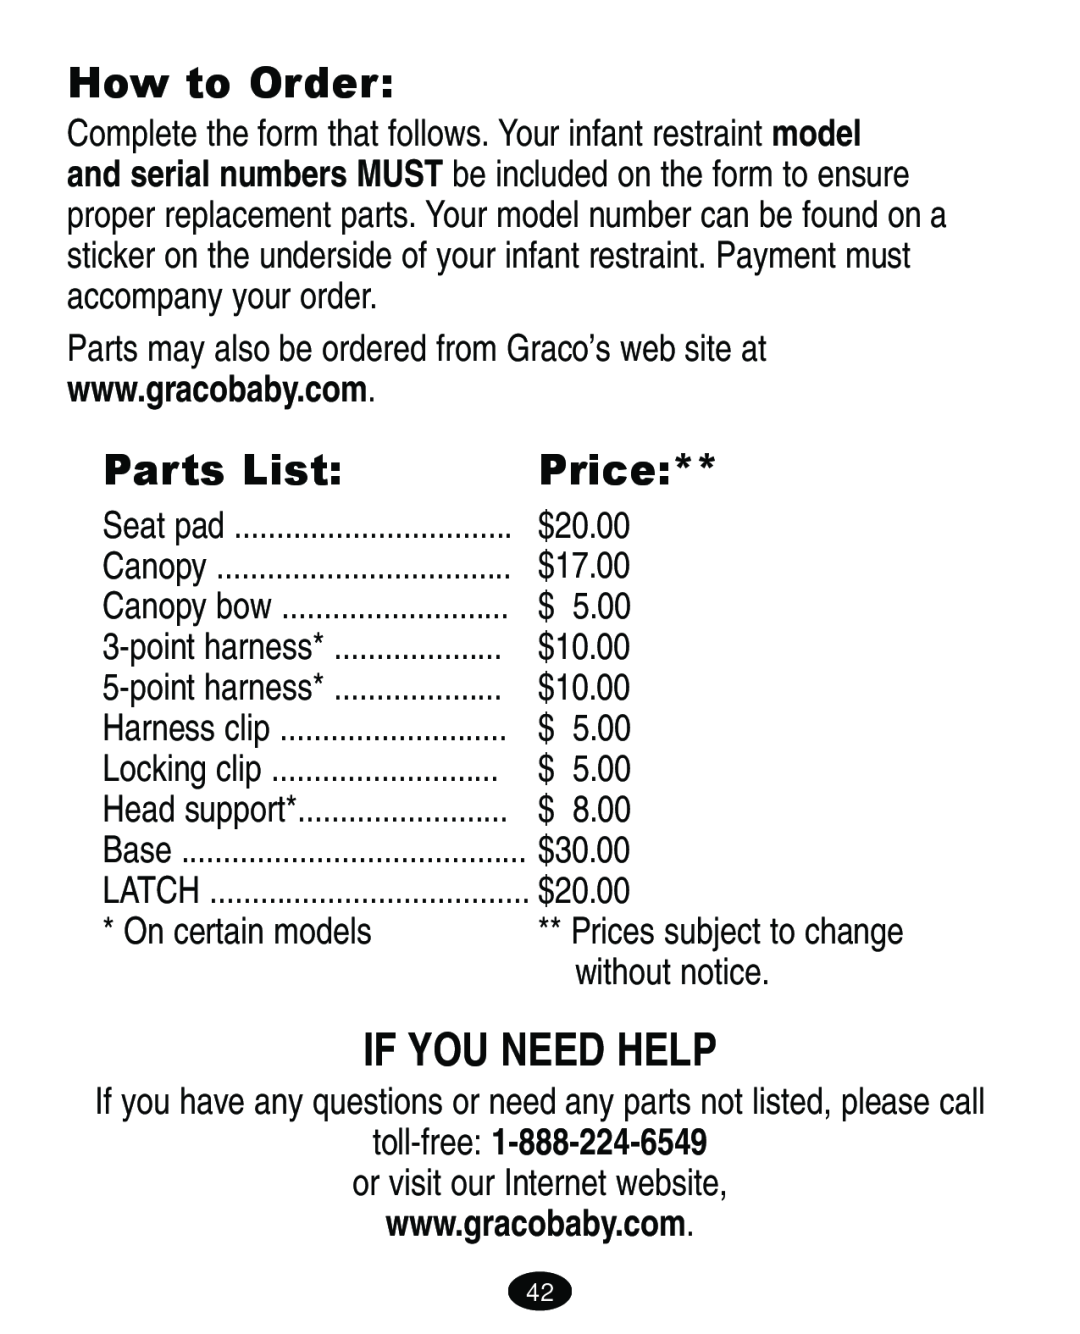 Graco 4460402 manual If You Need Help, How to Order, Parts List, Price, toll-free 